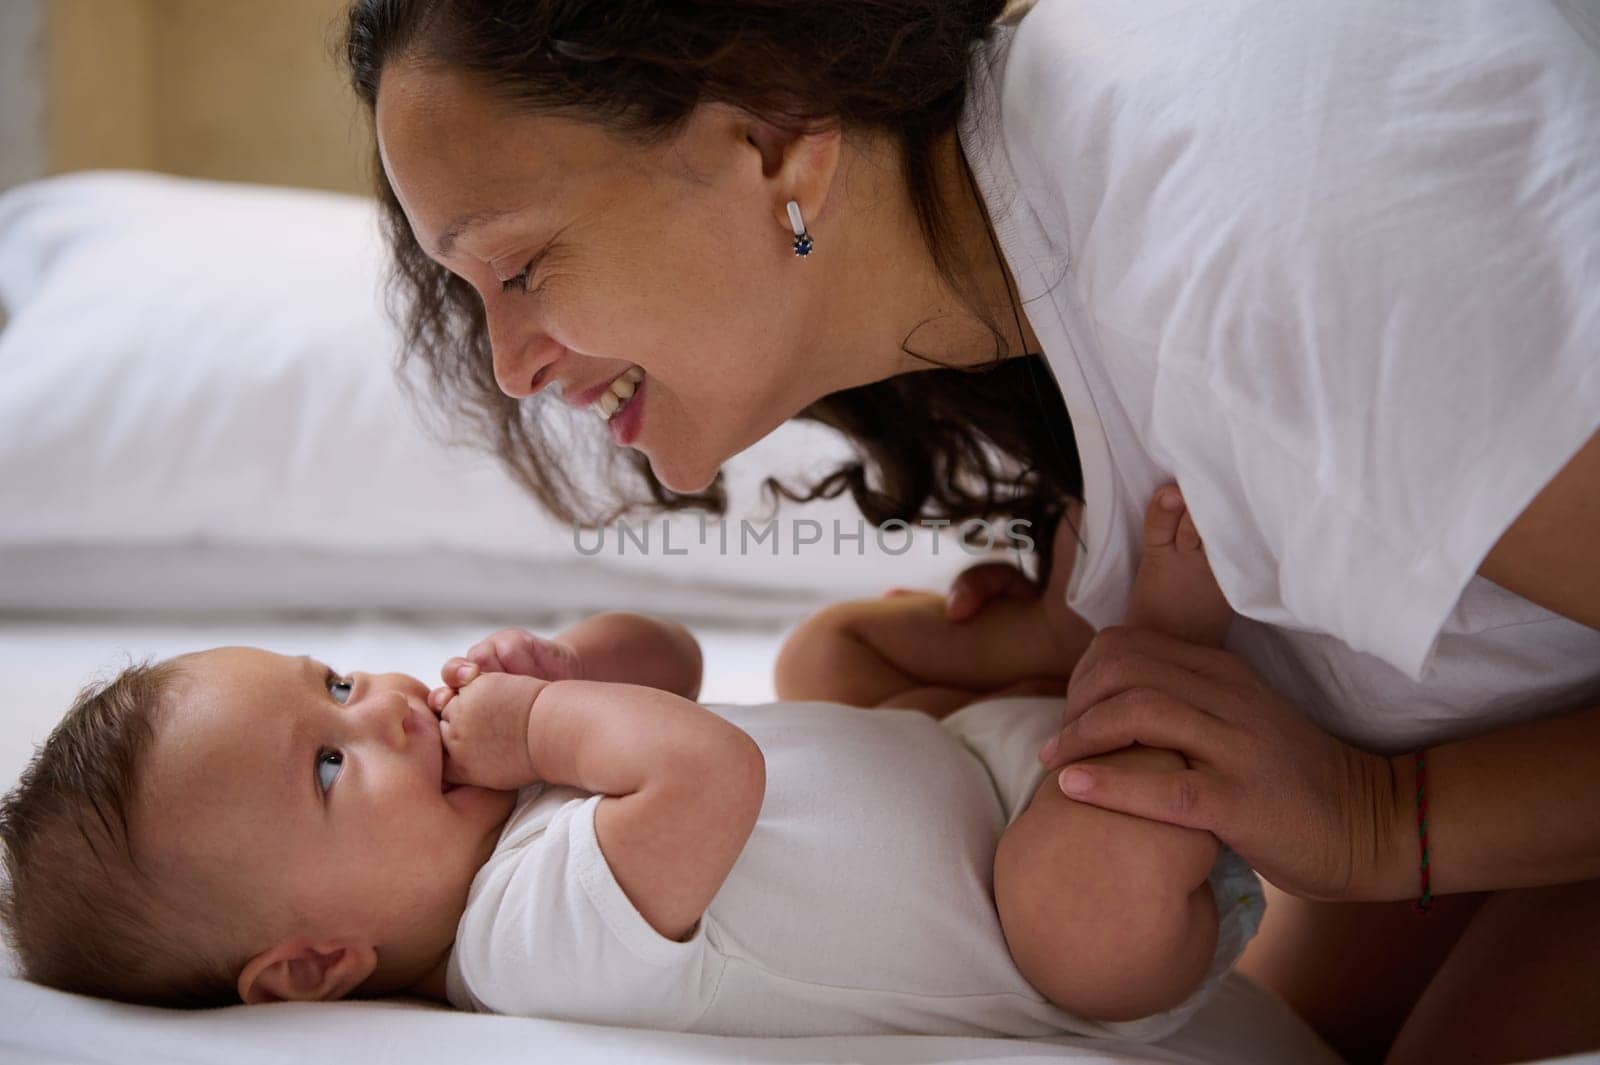 Authentic affectionate loving mother and baby boy son face to face, smiling, enjoying happy moments together. Infancy. Babyhood. Maternity leave concept. Happy family relationships. Smiling baby